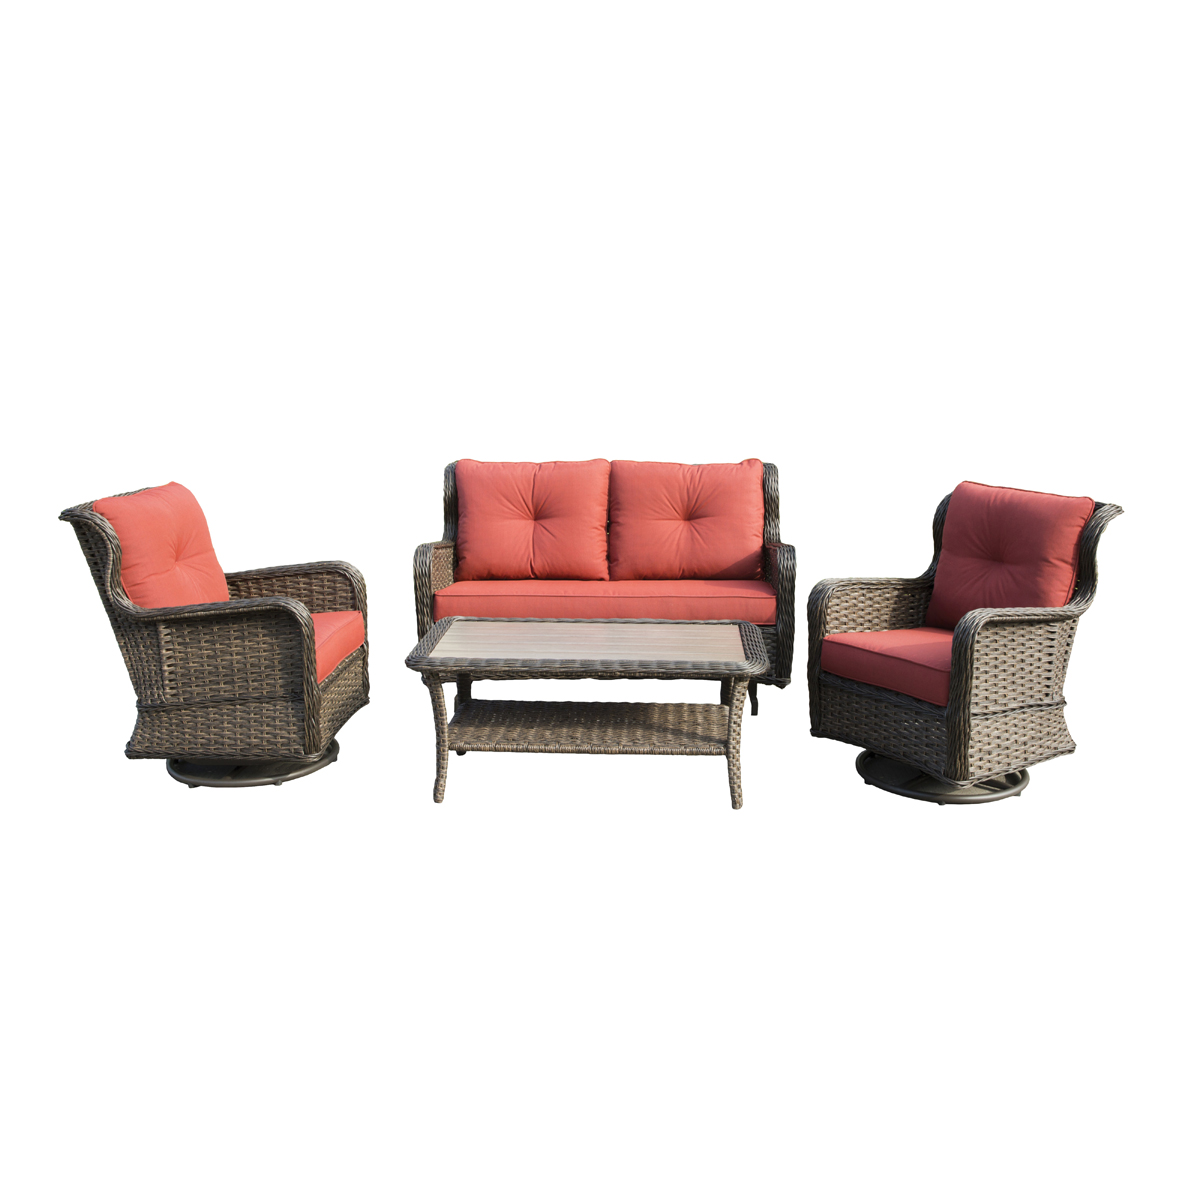 MS21001-1 Woodbury Deep Seating Set, Aluminum and All Weather Wicker, Orange/Red, Four-Piece